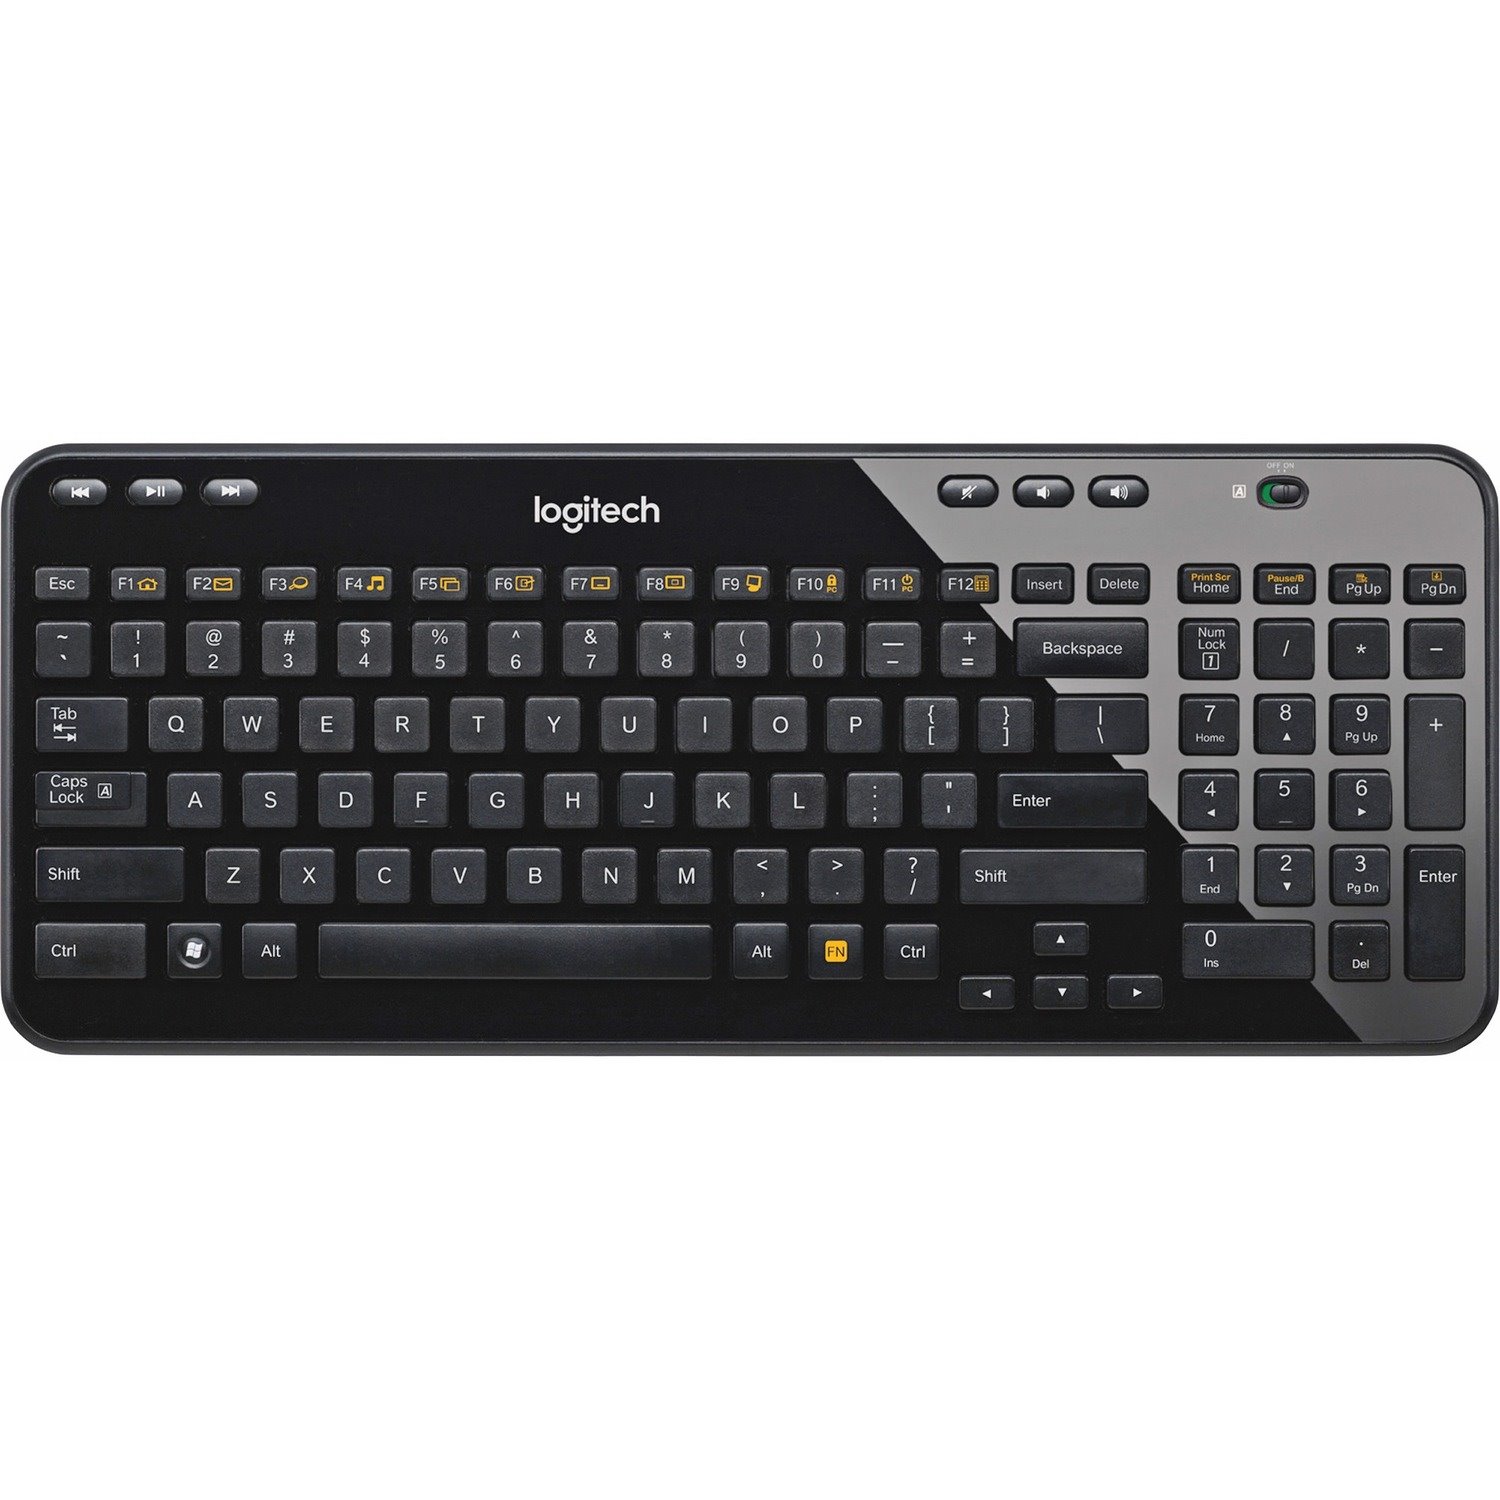 Logitech K360 Compact Wireless Keyboard for Windows, 2.4GHz Wireless, USB Unifying Receiver, 12 F-Keys, 3-Year Battery Life, Compatible with PC, Laptop (Glossy Black)